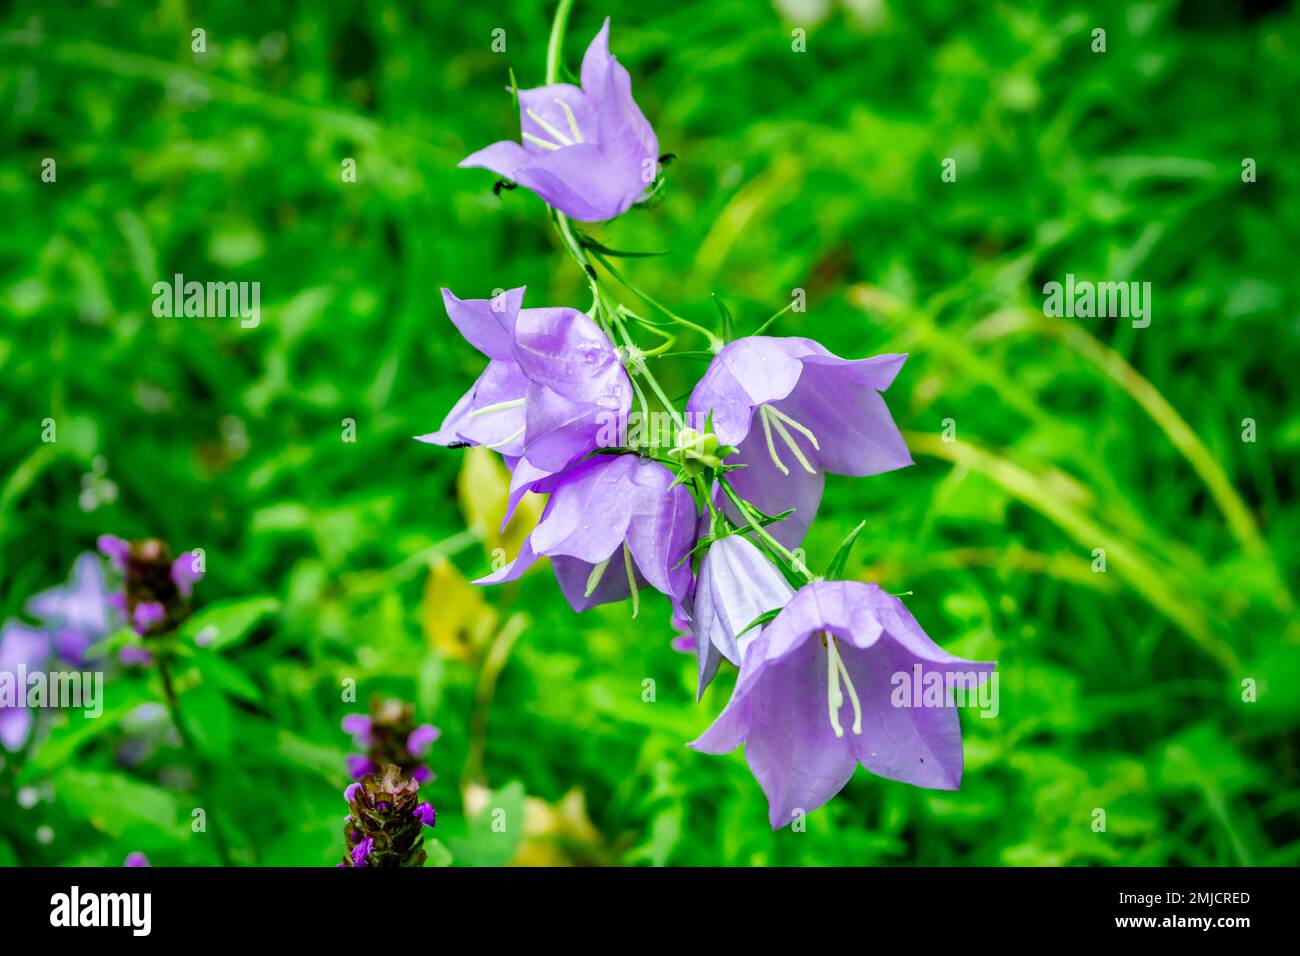 Bellflower or Campanula persicifolia in nature in July Stock Photo - Alamy